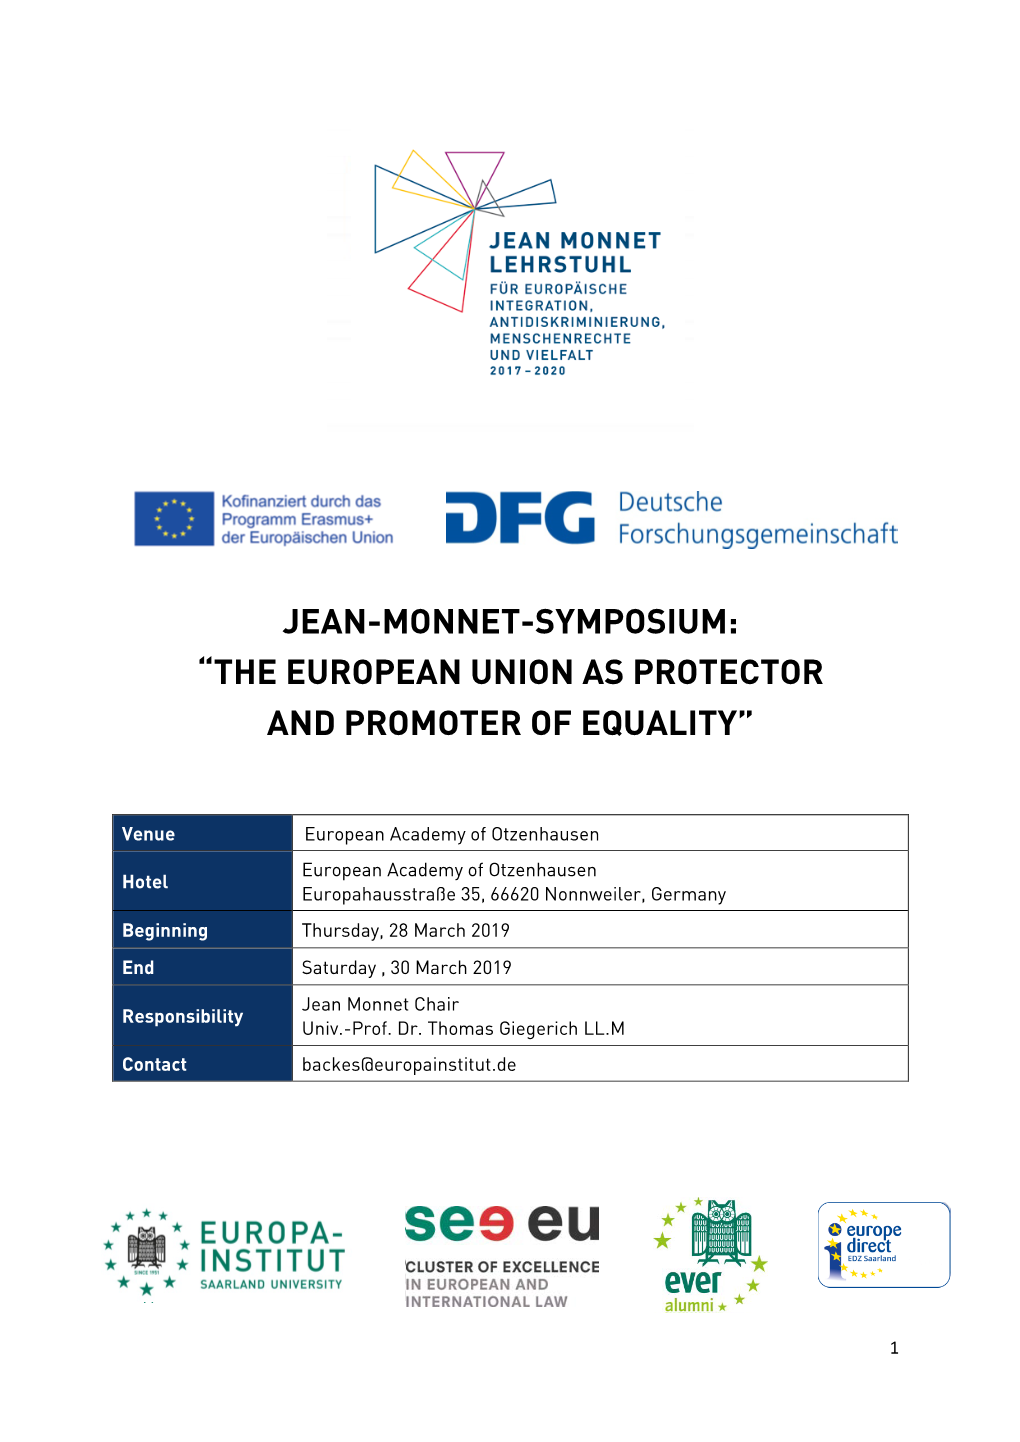 Jean-Monnet-Symposium: “The European Union As Protector and Promoter of Equality”